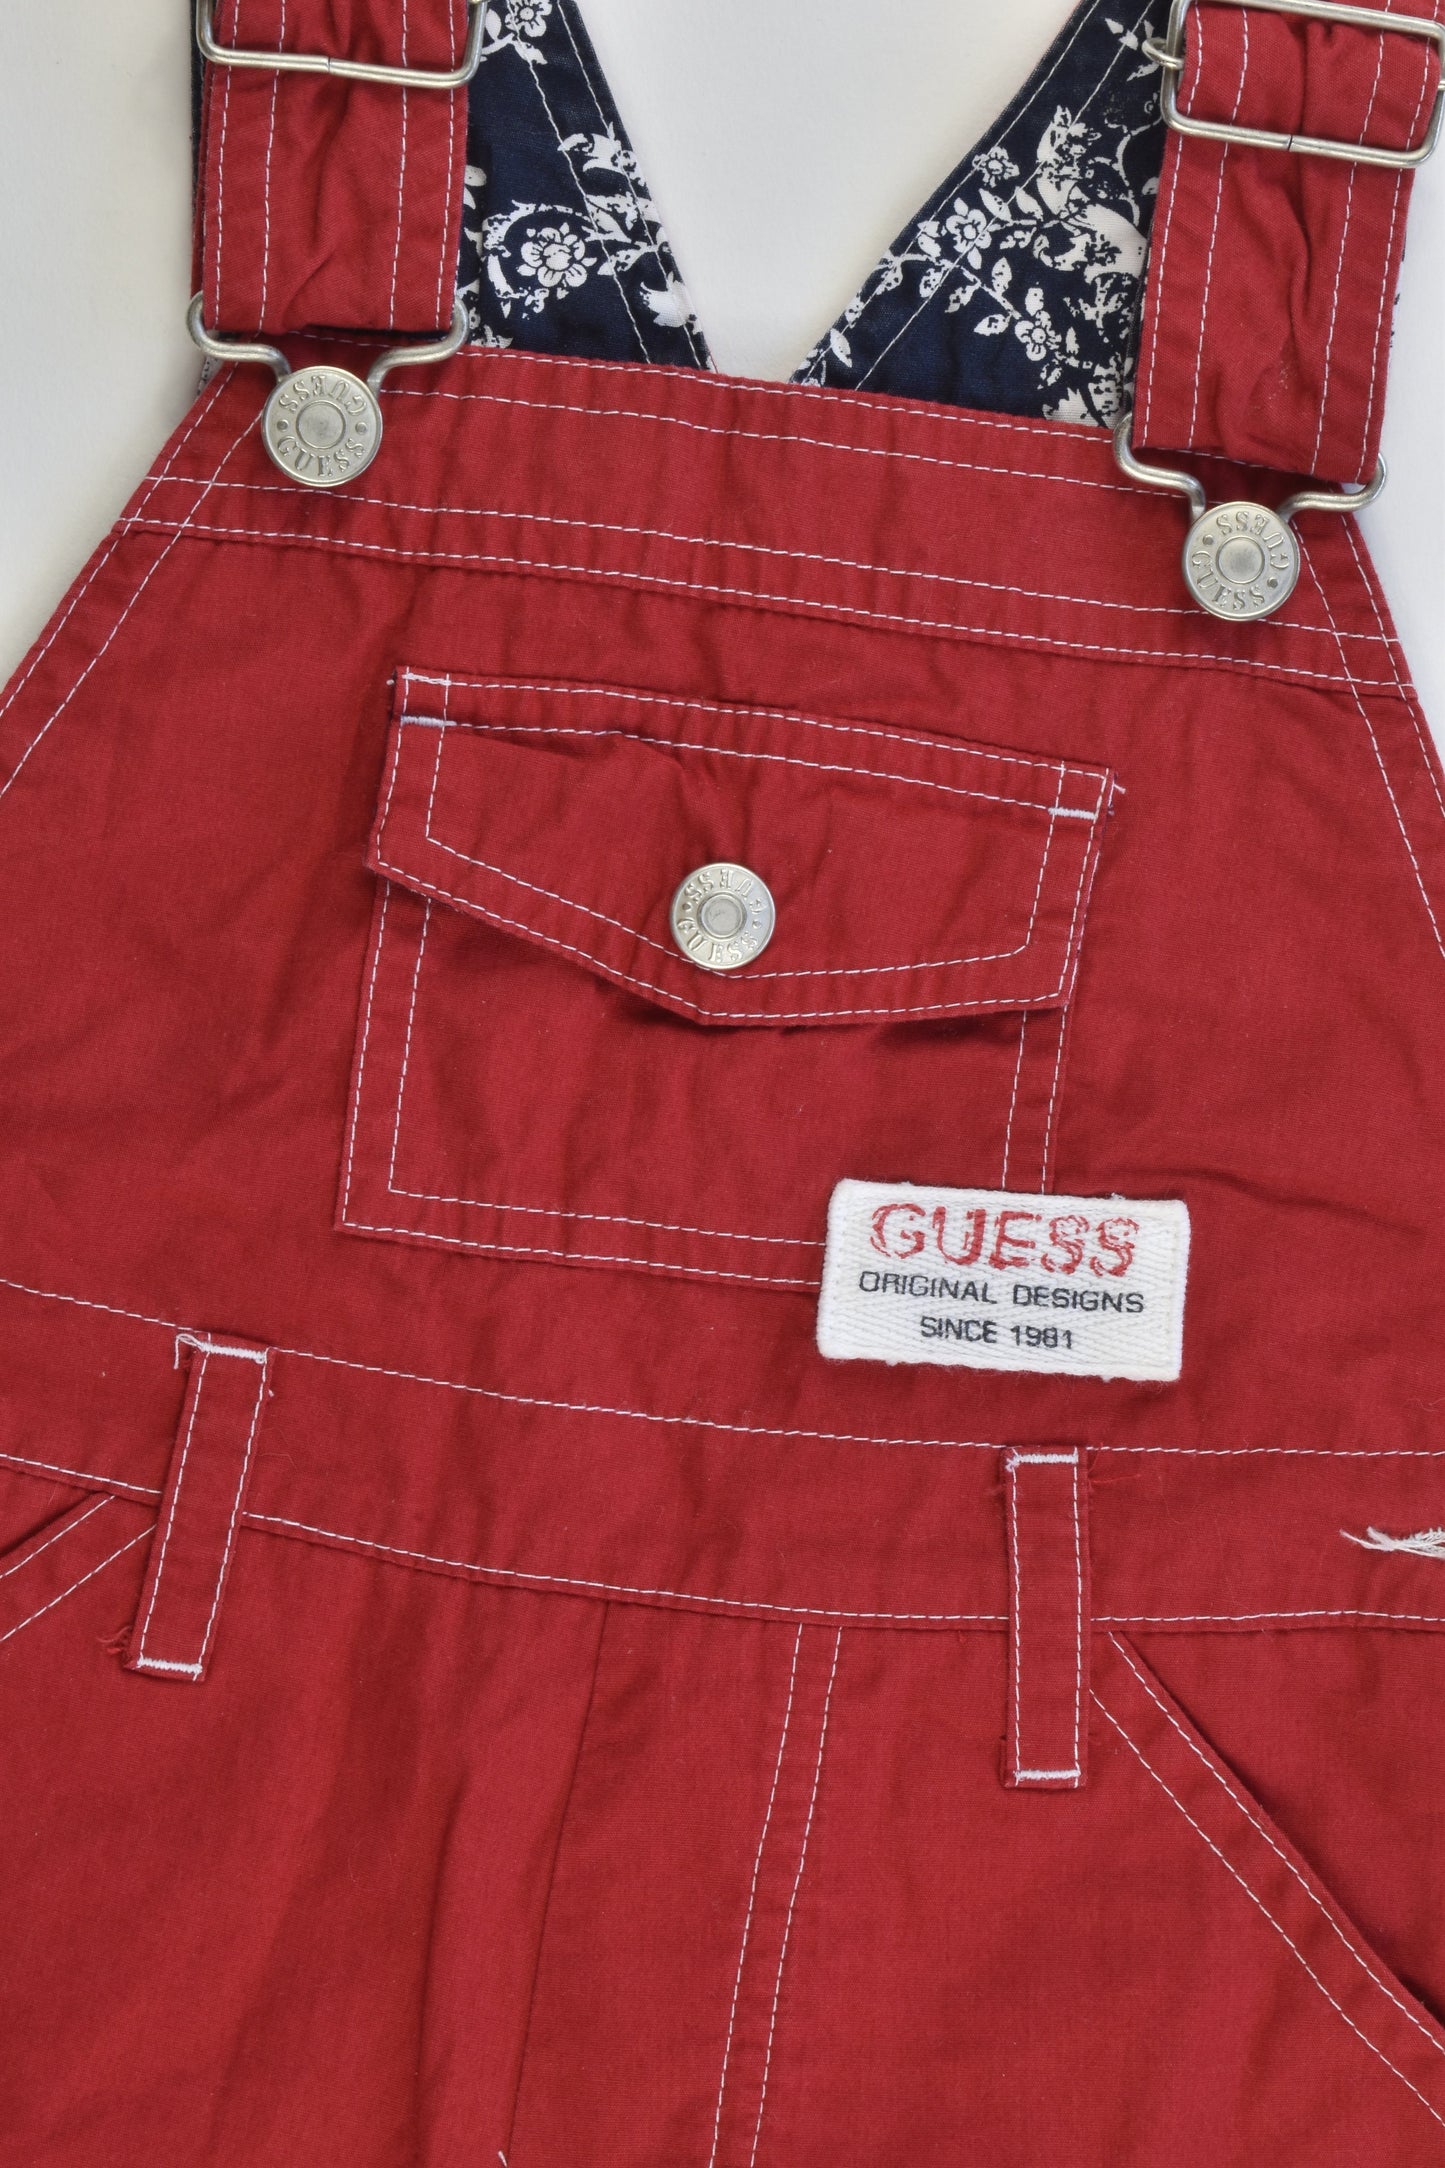 Guess Size 12 months (Generous) Short Overalls